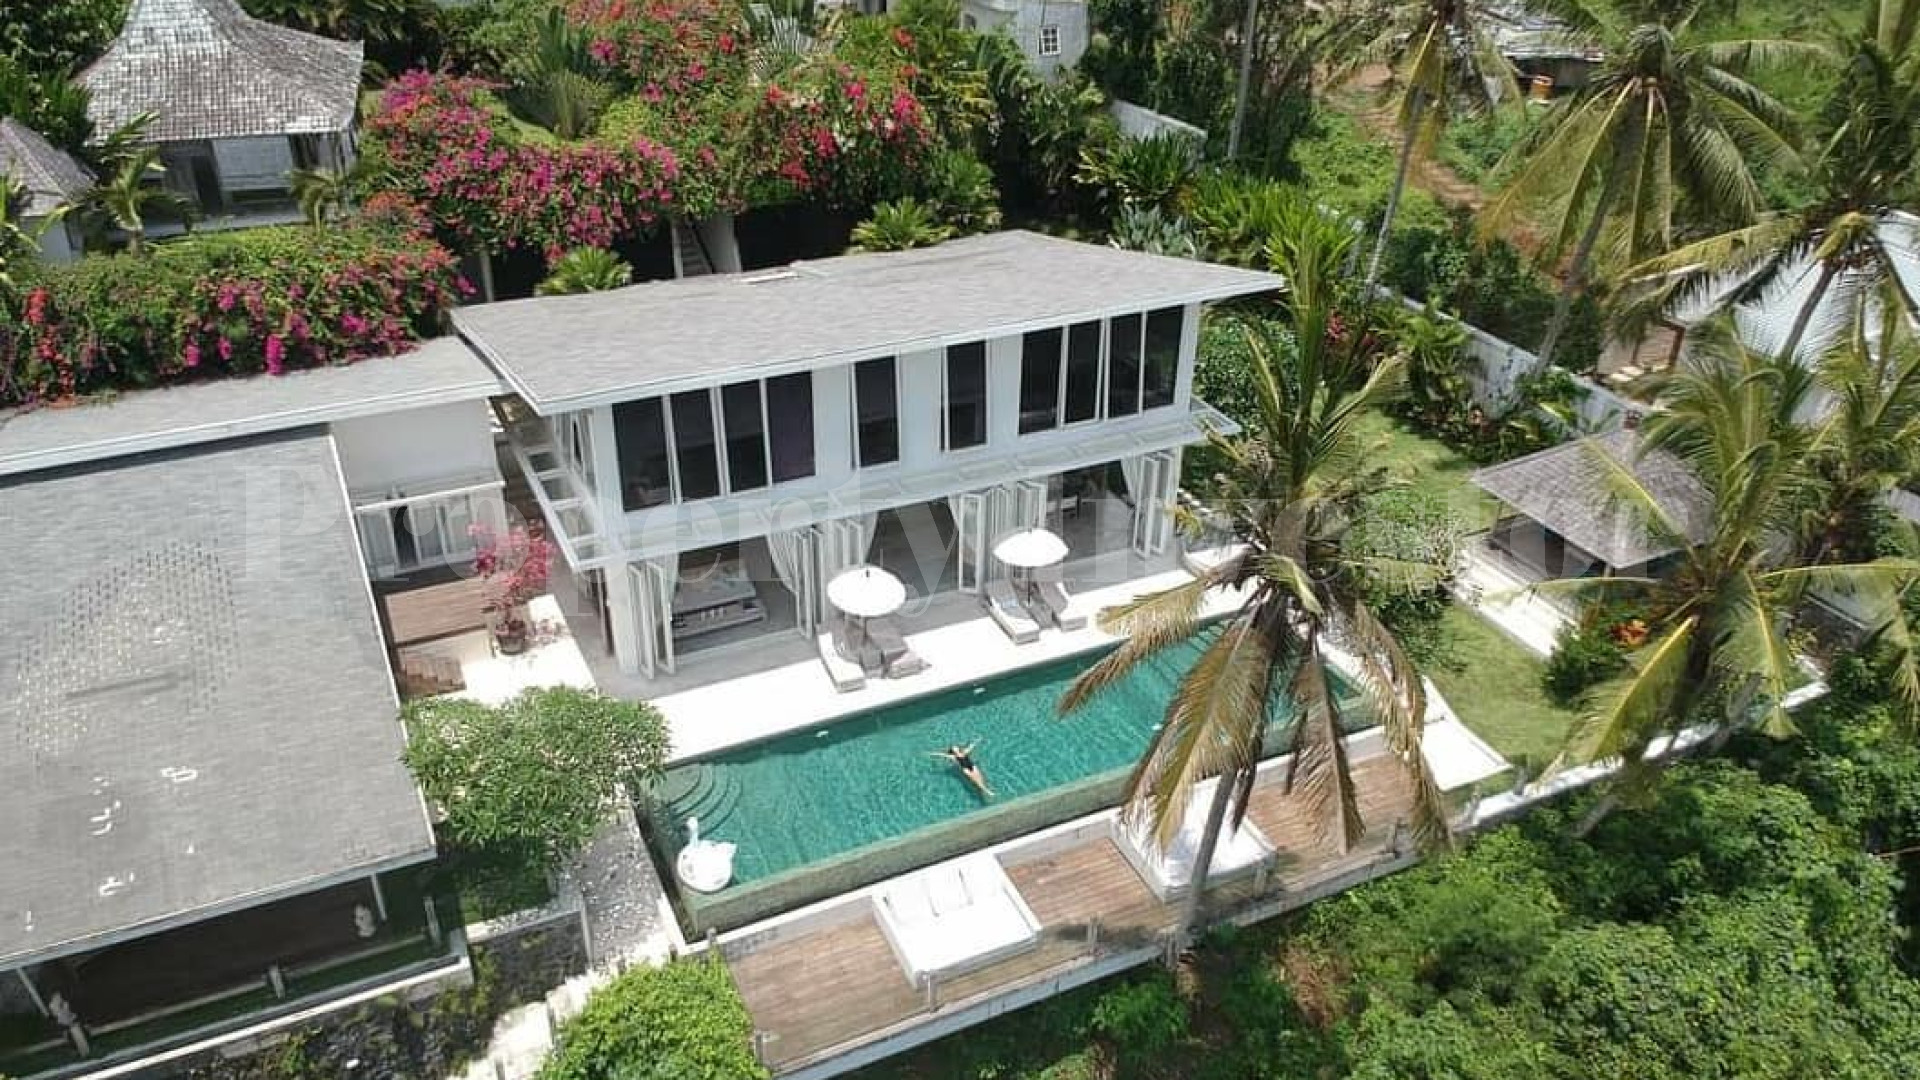 Sophisticated 5 Bedroom Luxury Riverfront Villa for Sale in South Ubud, Bali